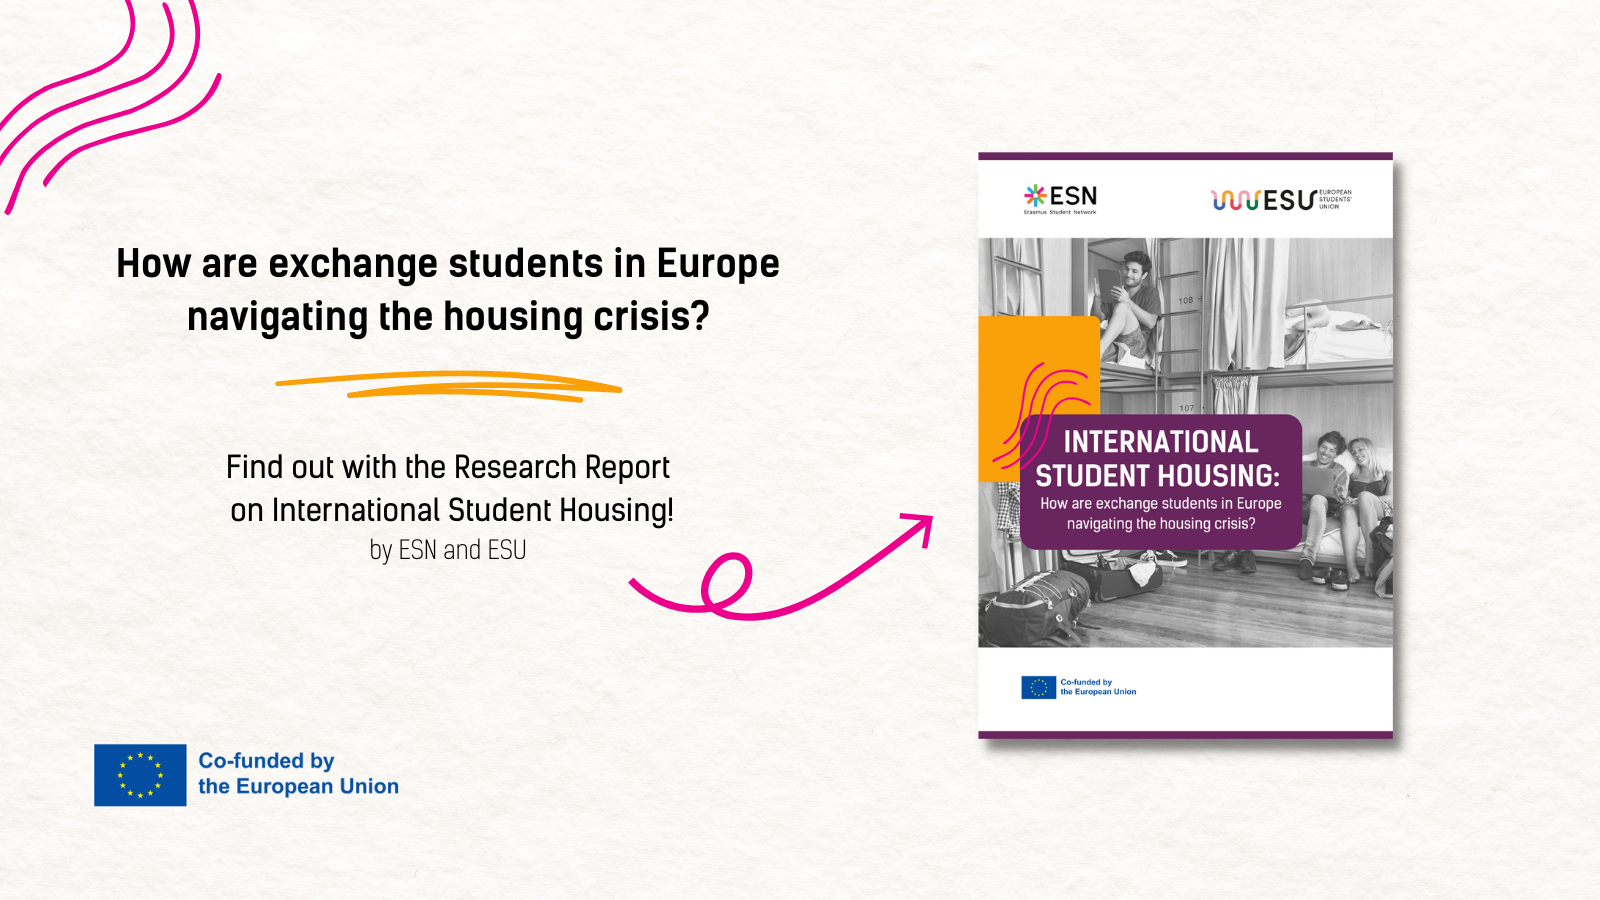 "How are exchange students in Europe navigating the housing crisis? Find out with the Research Report on International Student Housing!"